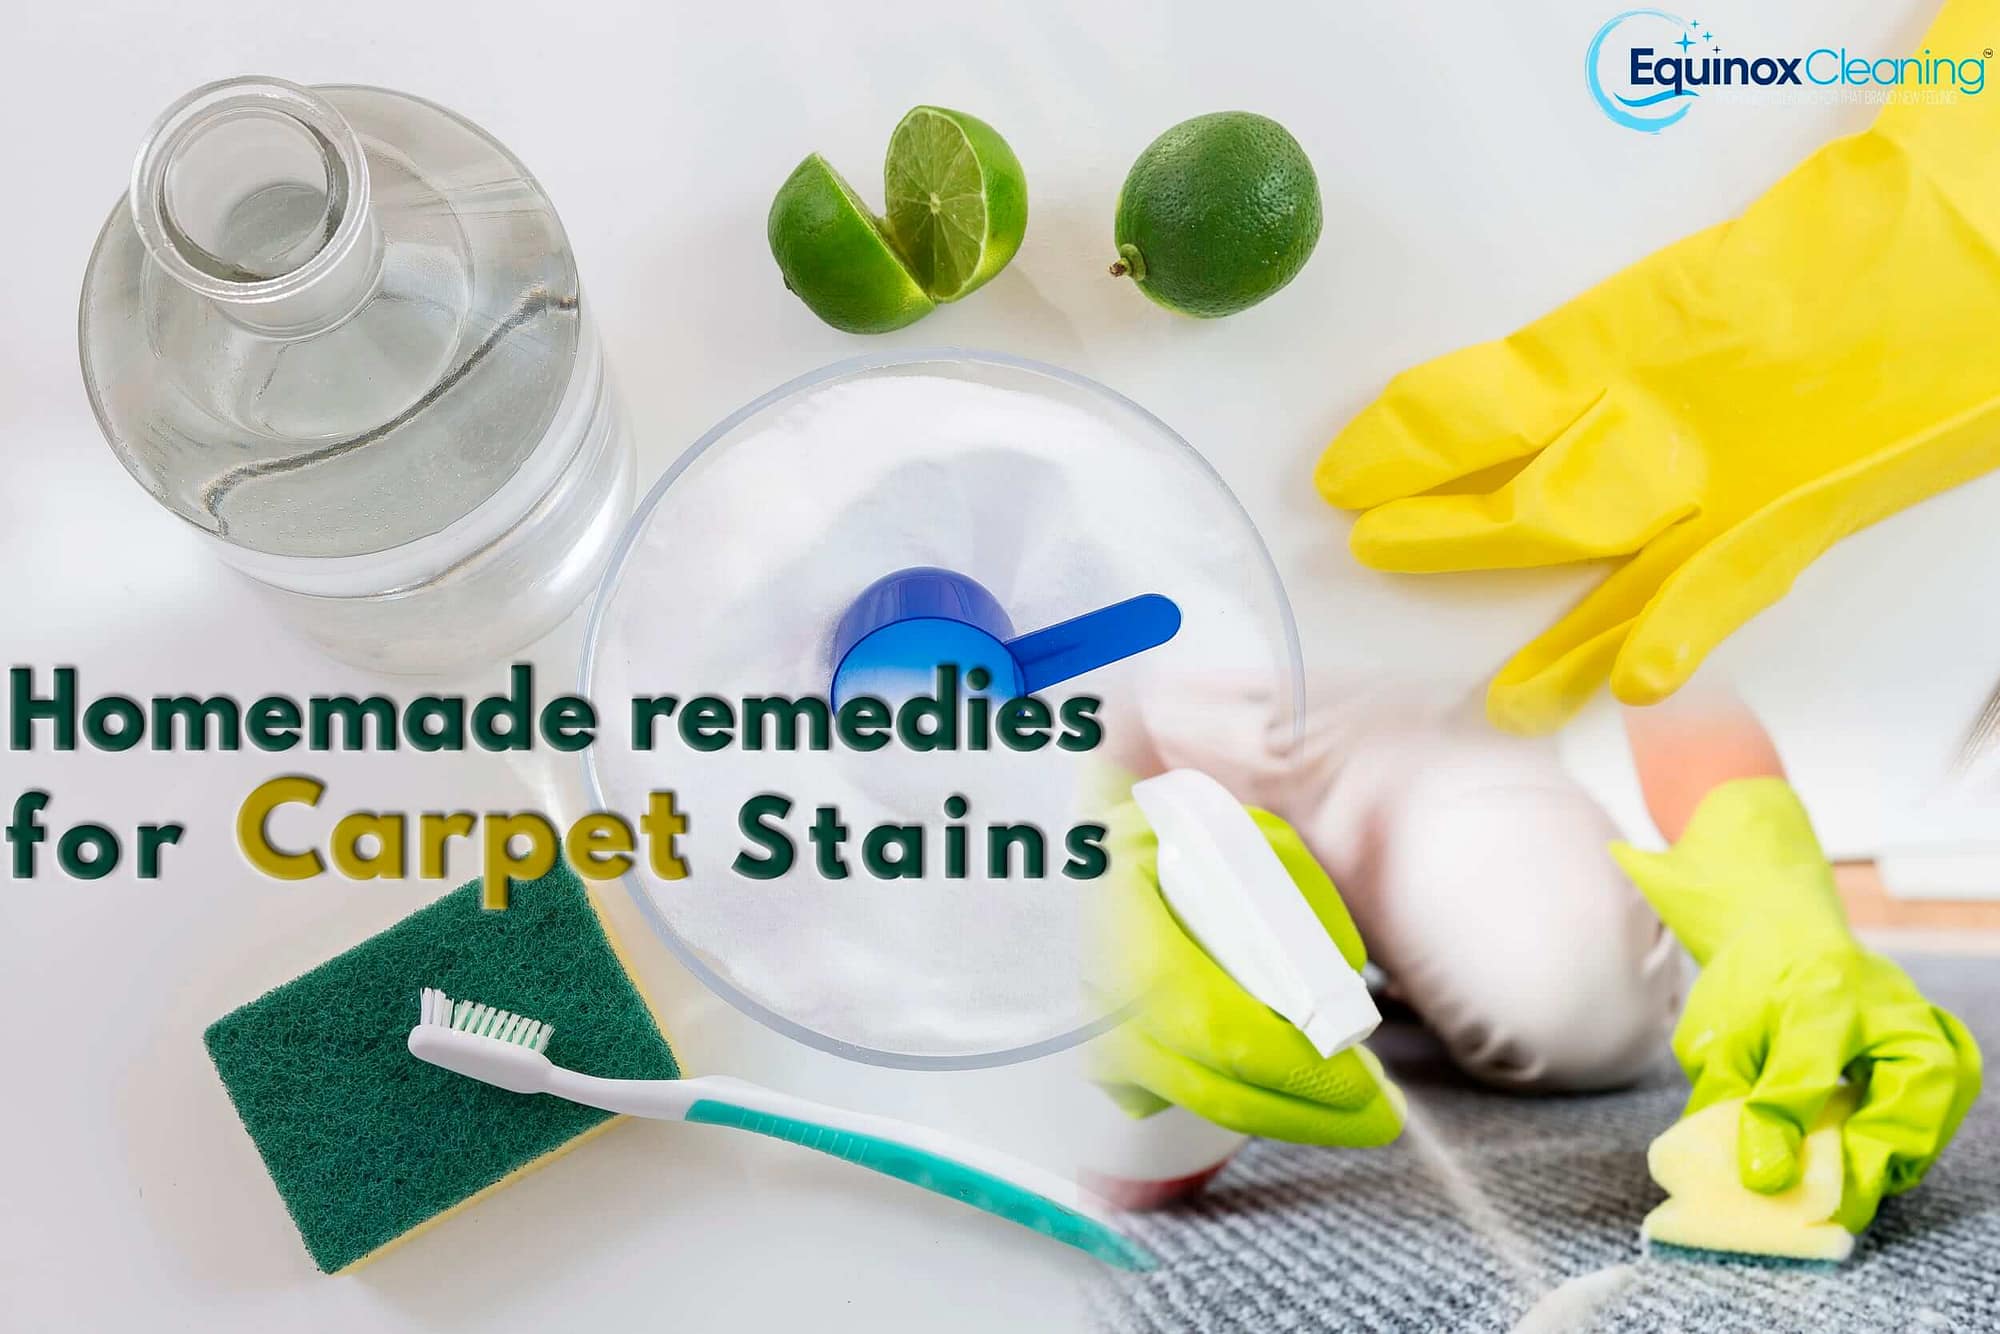 You are currently viewing The homemade remedies for Carpet Stains